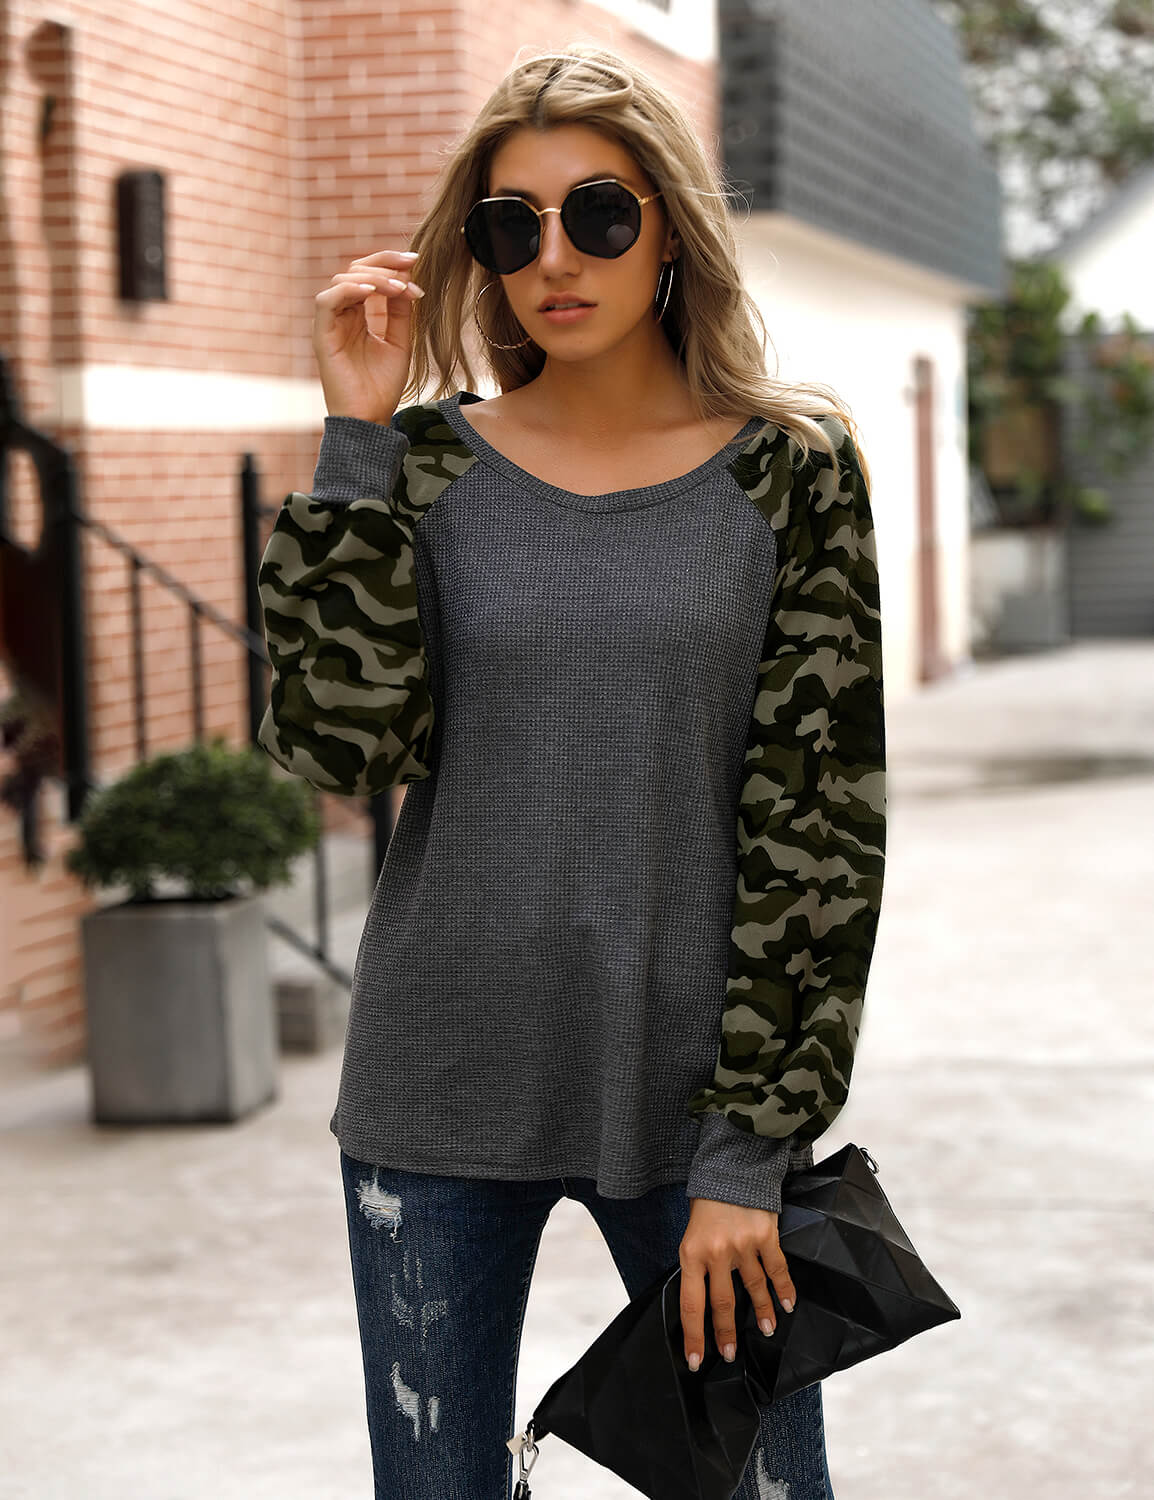 Blooming Jelly_Street Style Camo Long Sleeve T-Shirt_Camo Print_152709_07_2020 Women Fashion Outfits_Tops_T-Shirt